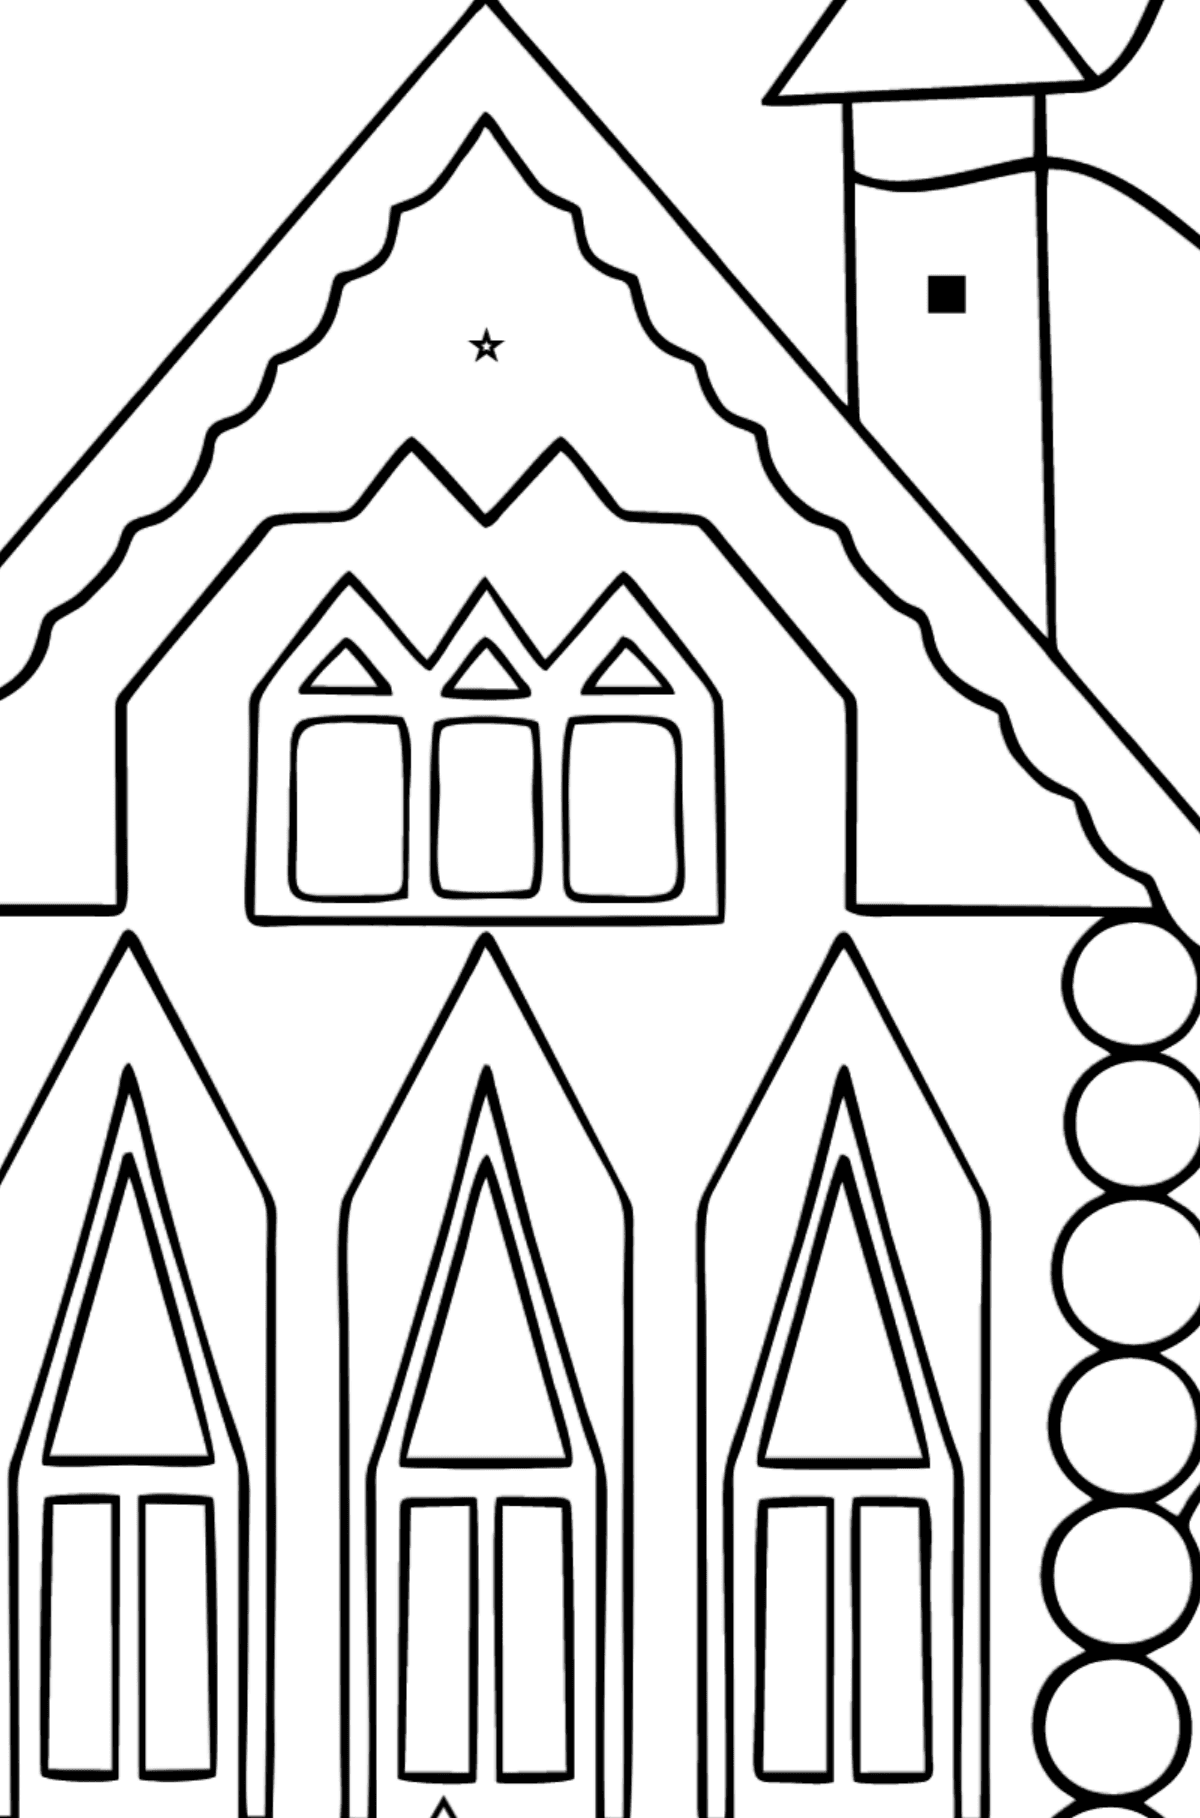 Simple Coloring Page - A Rainbow House - Coloring by Symbols and Geometric Shapes for Kids